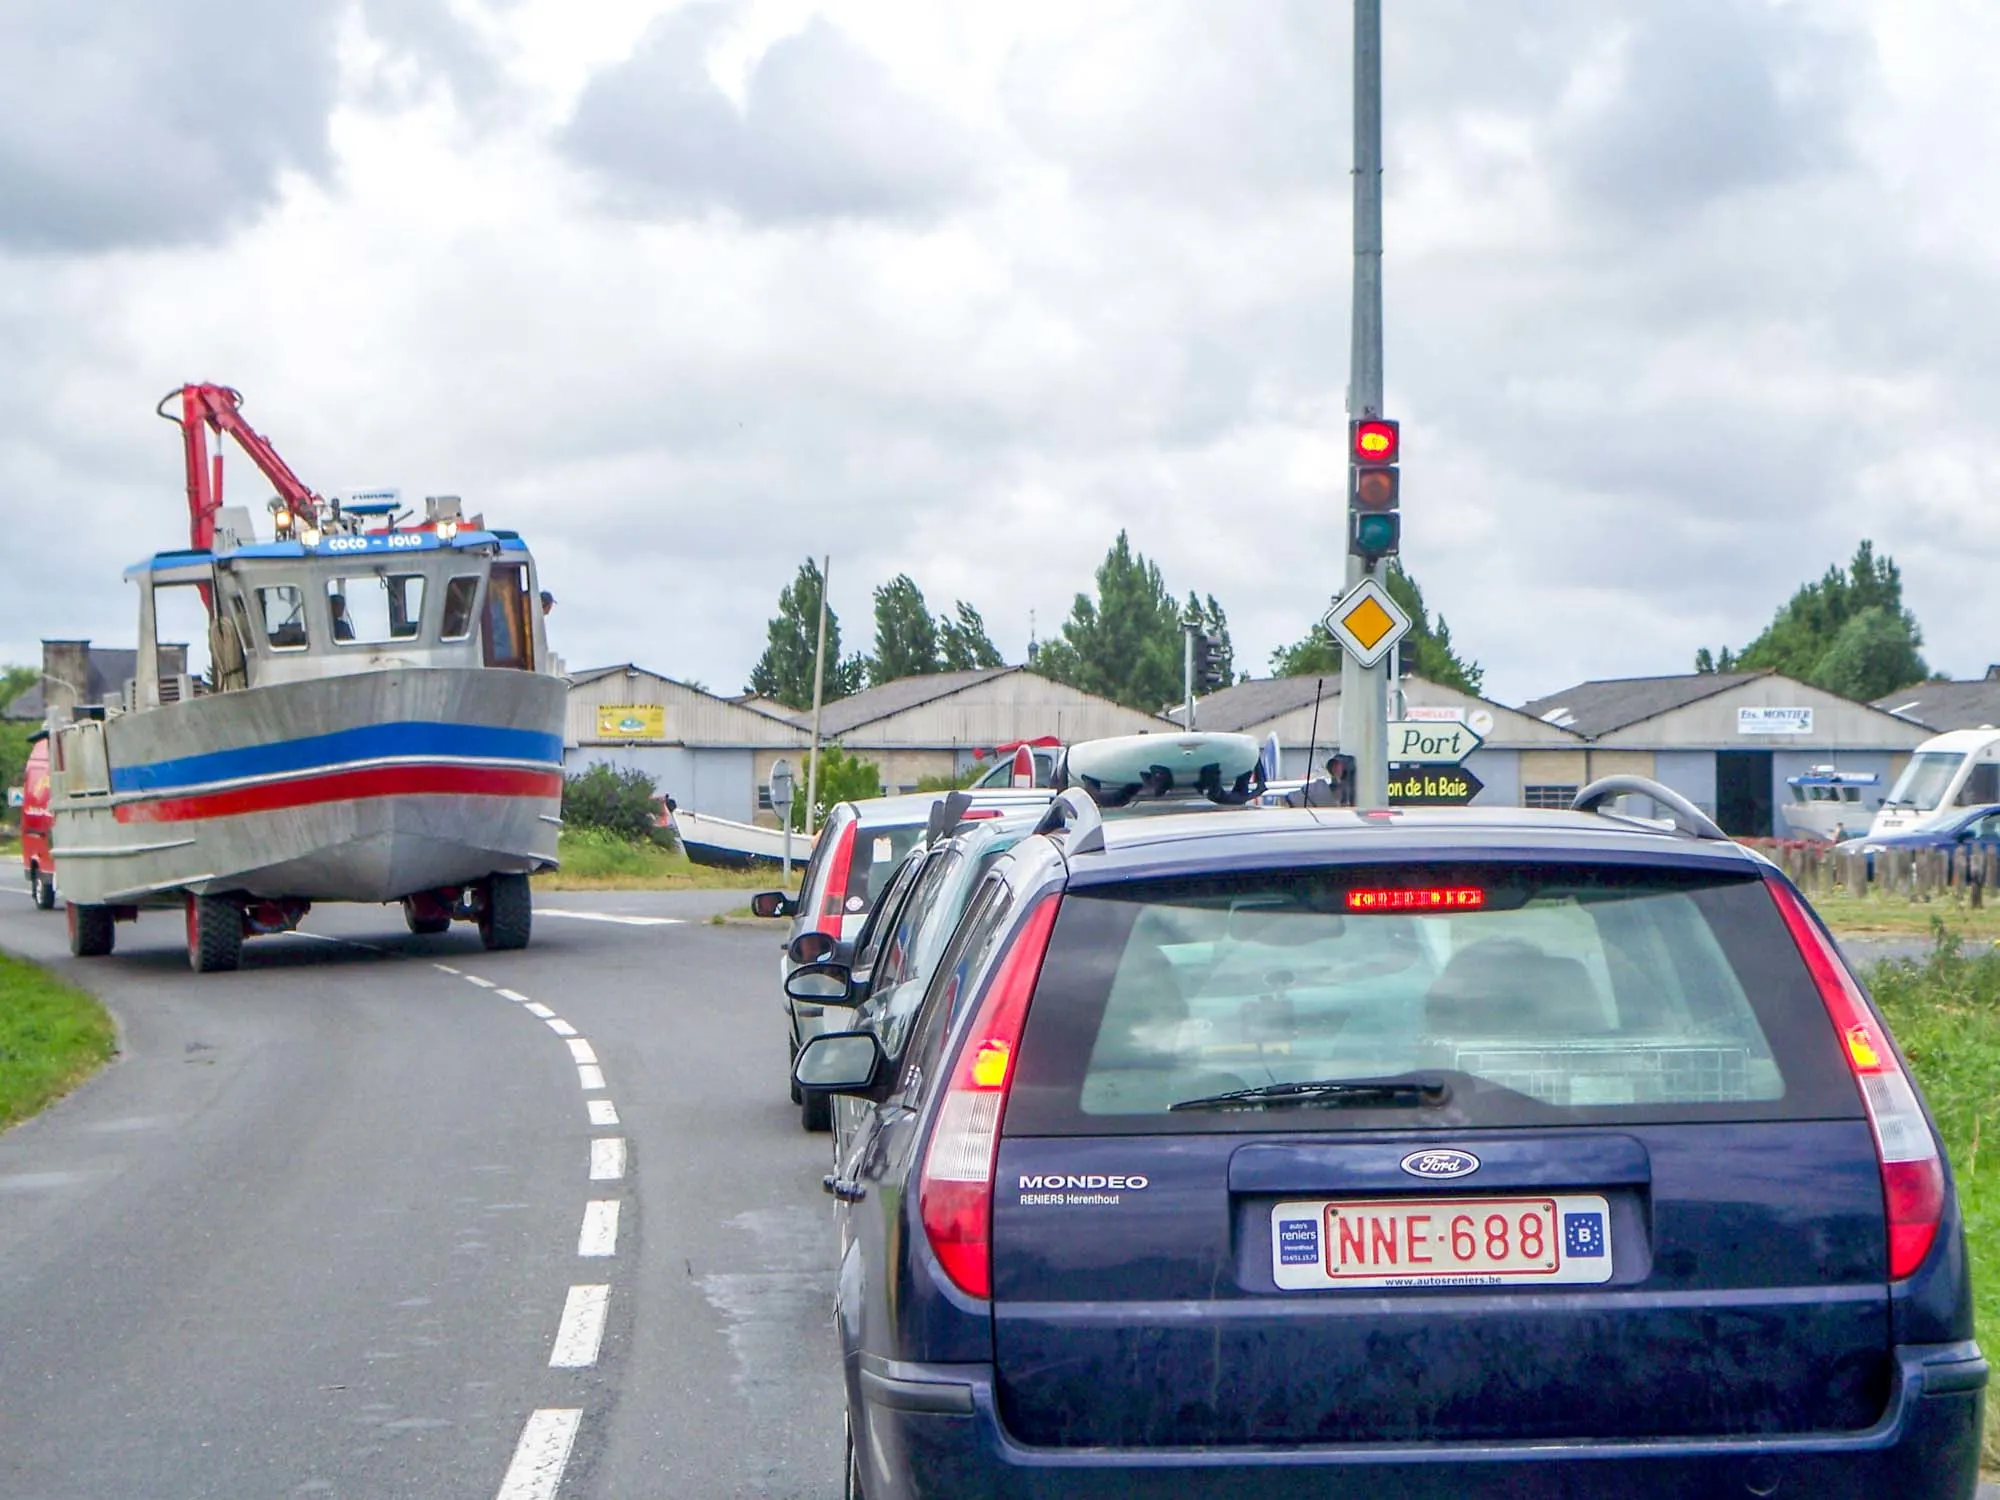 Line of cars at a traffic light yielding to a motorized boat on the road